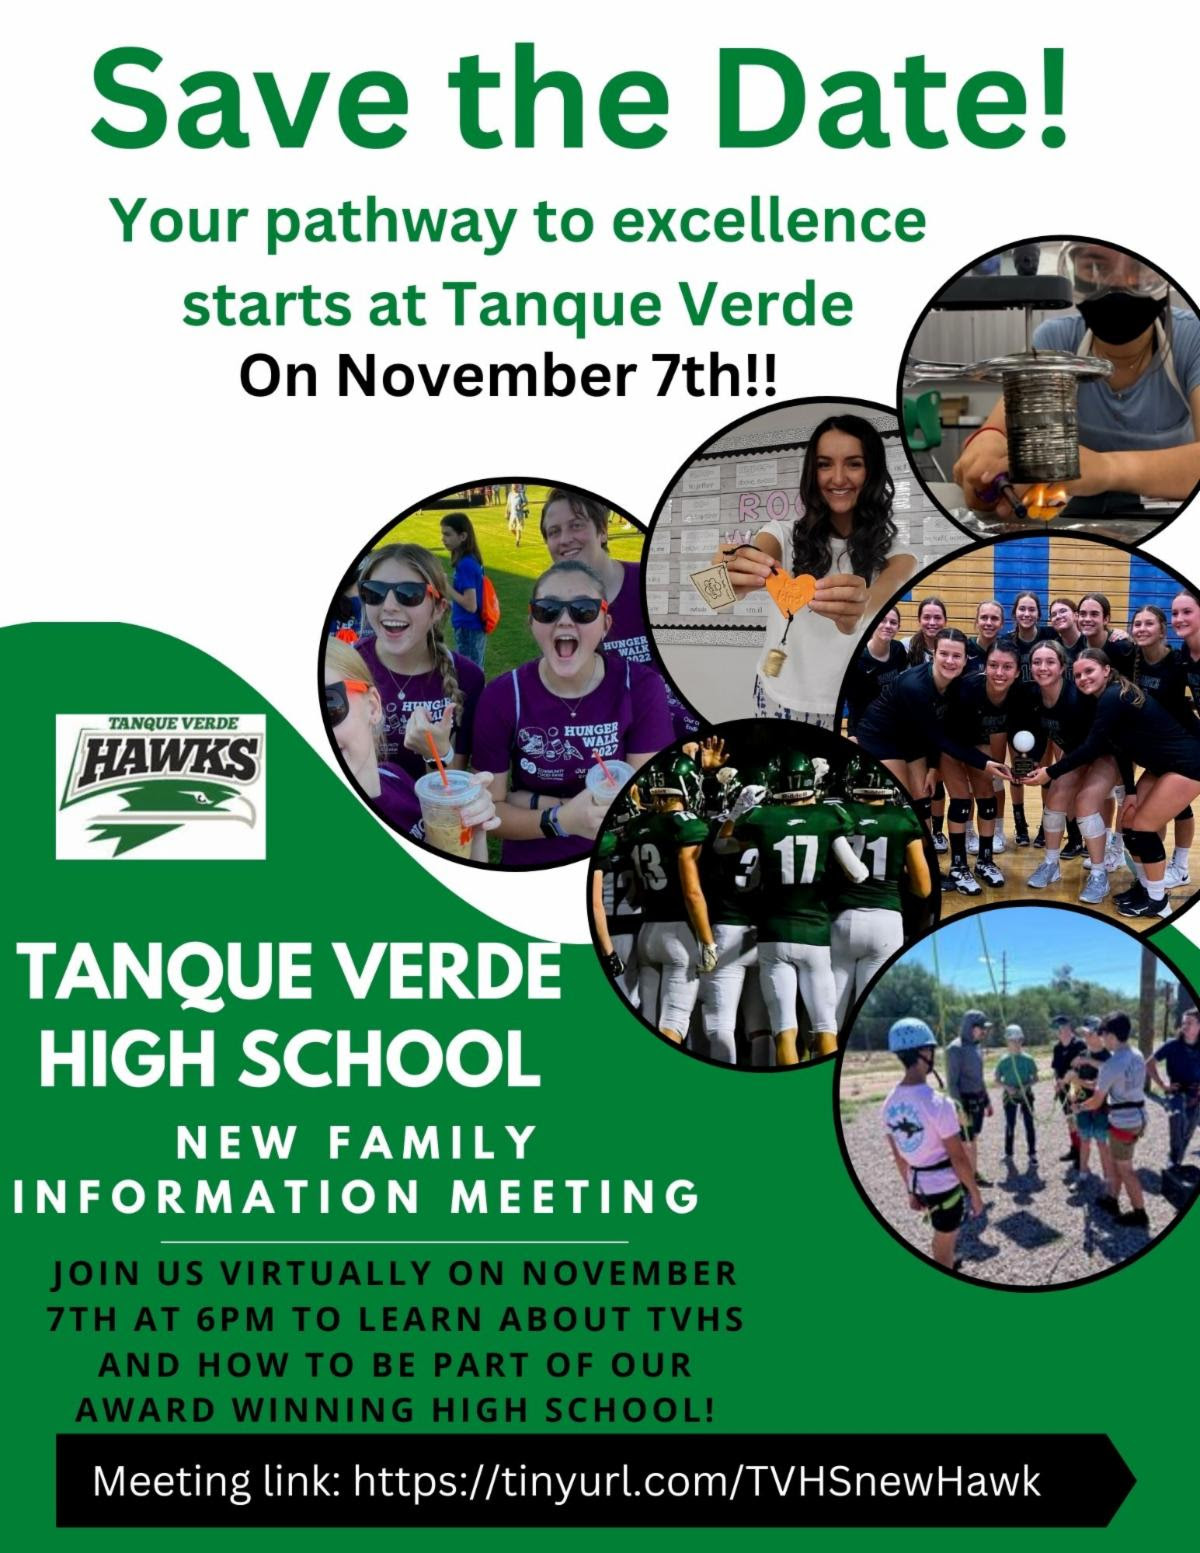 TVHS New Family Information Day